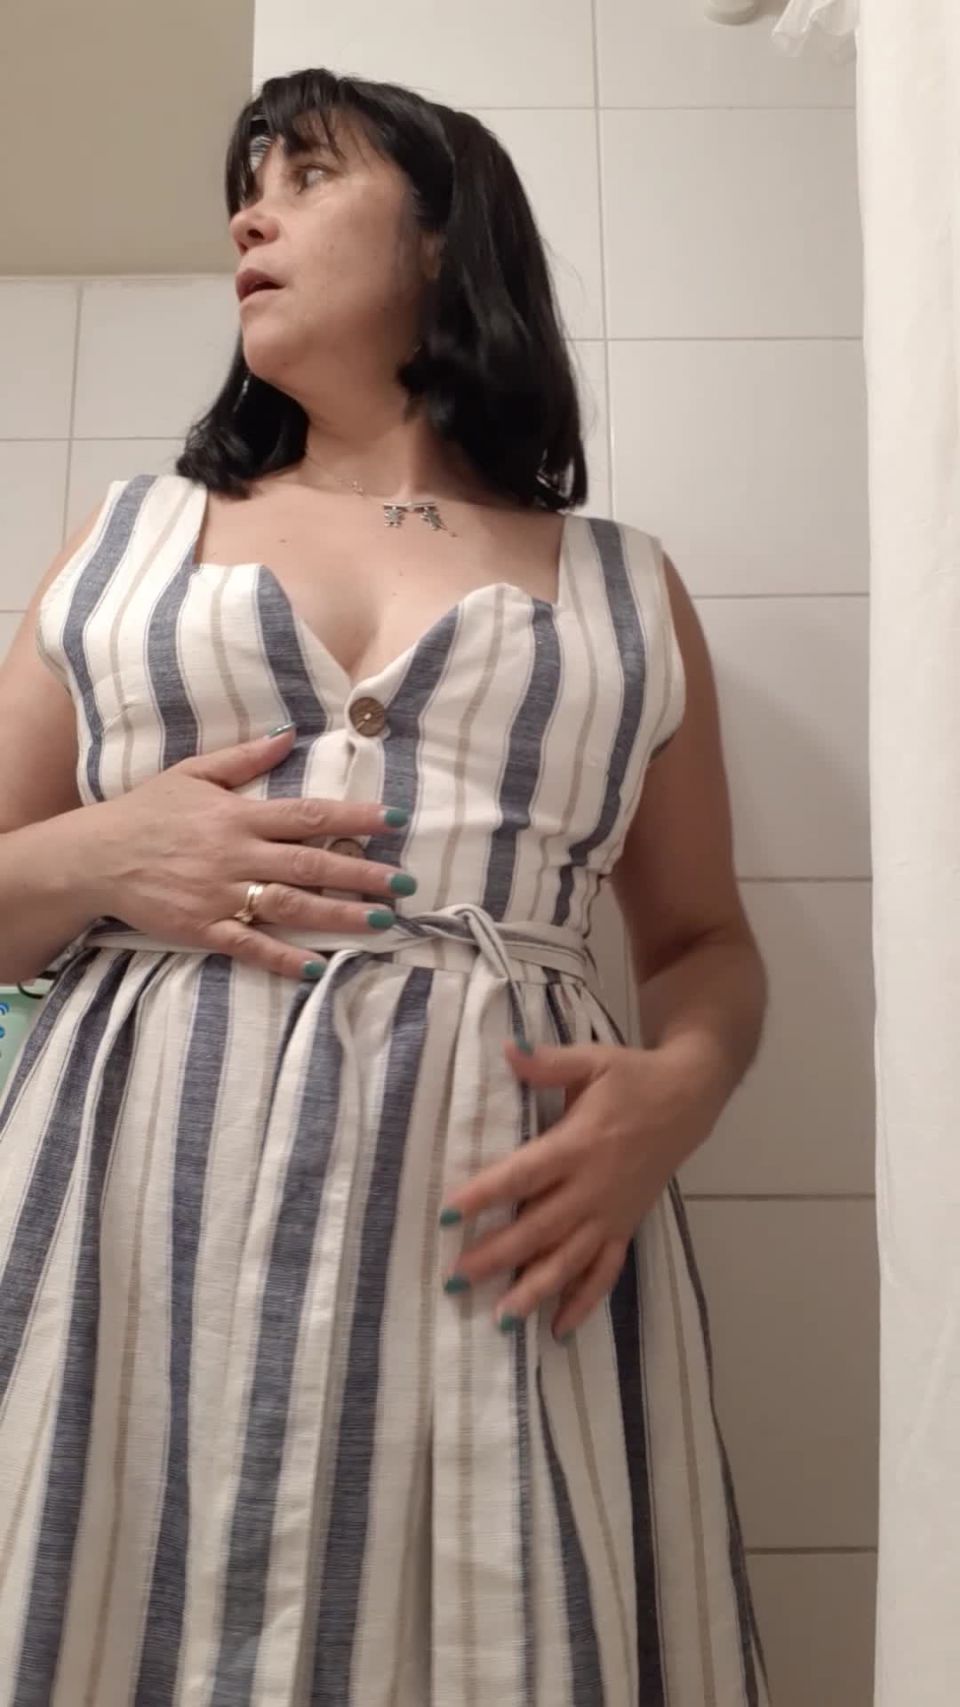 M@nyV1ds - The Hairy Pussy Mom - Pov mom fuck son in shower